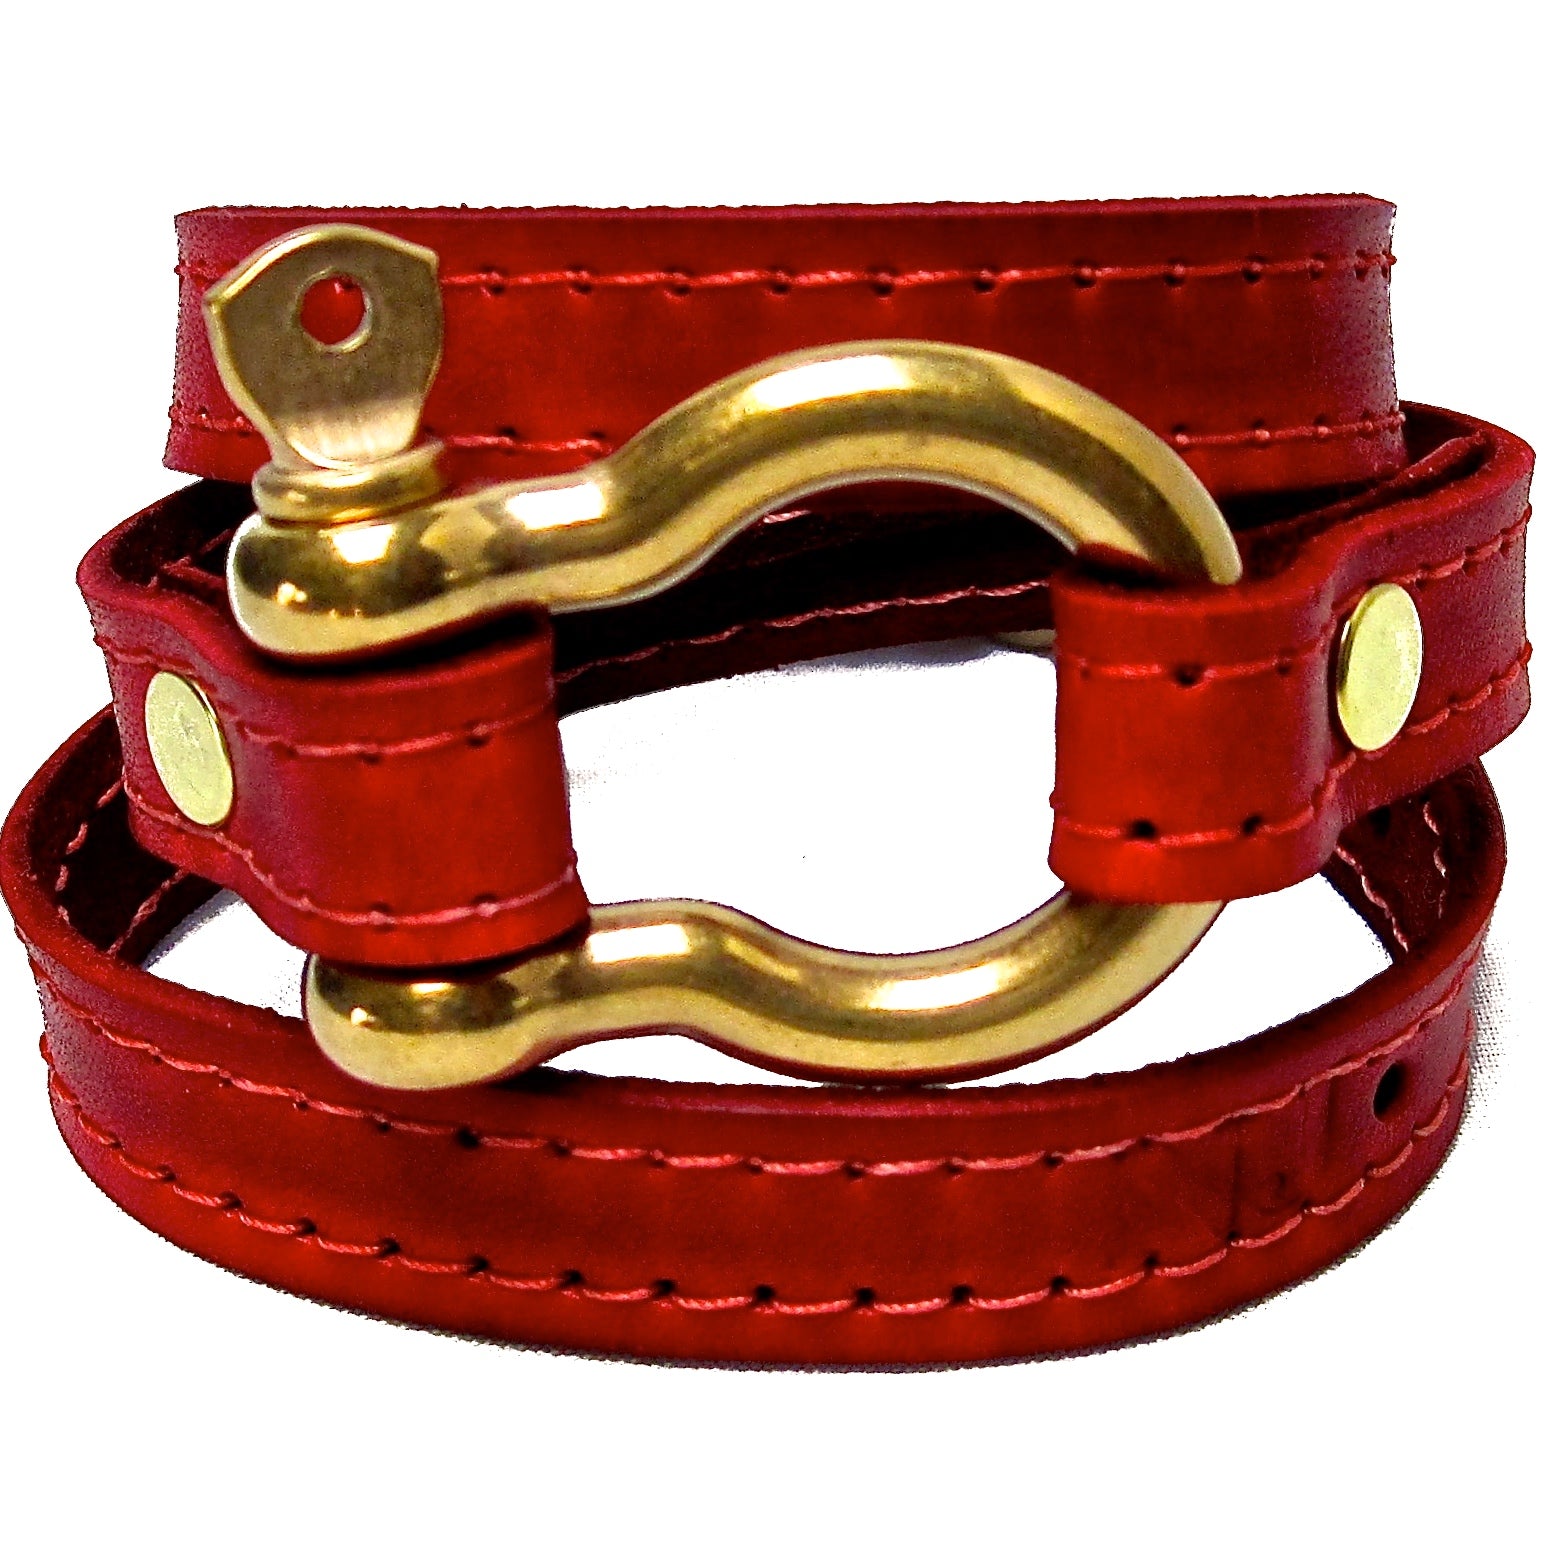 Nyet jewelry Signature Gold Shackle Wraparound Bracelet Red BY NYET JEWELRY